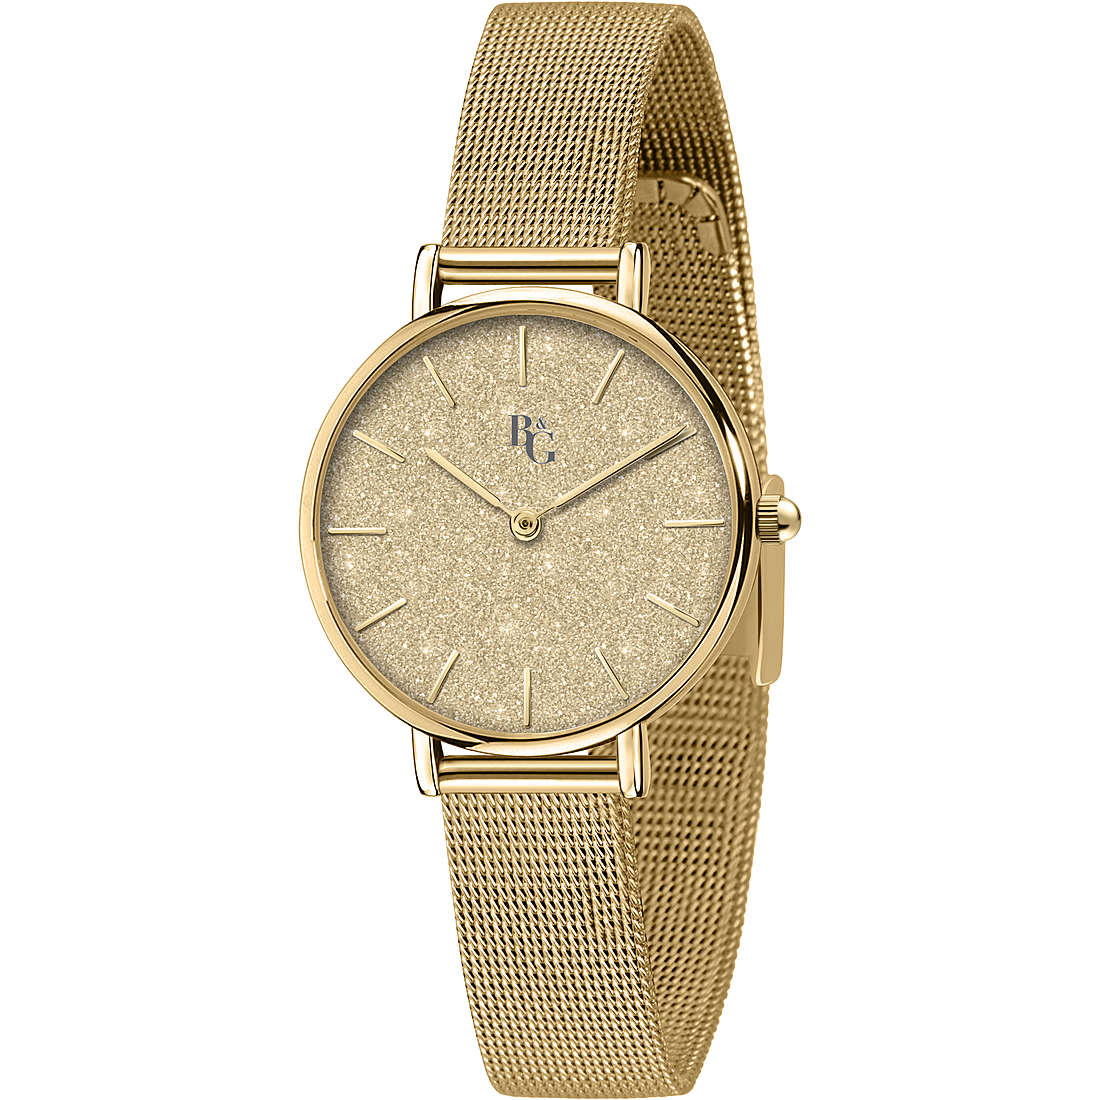 only time watch Metal Gold dial woman Preppy R3853252529